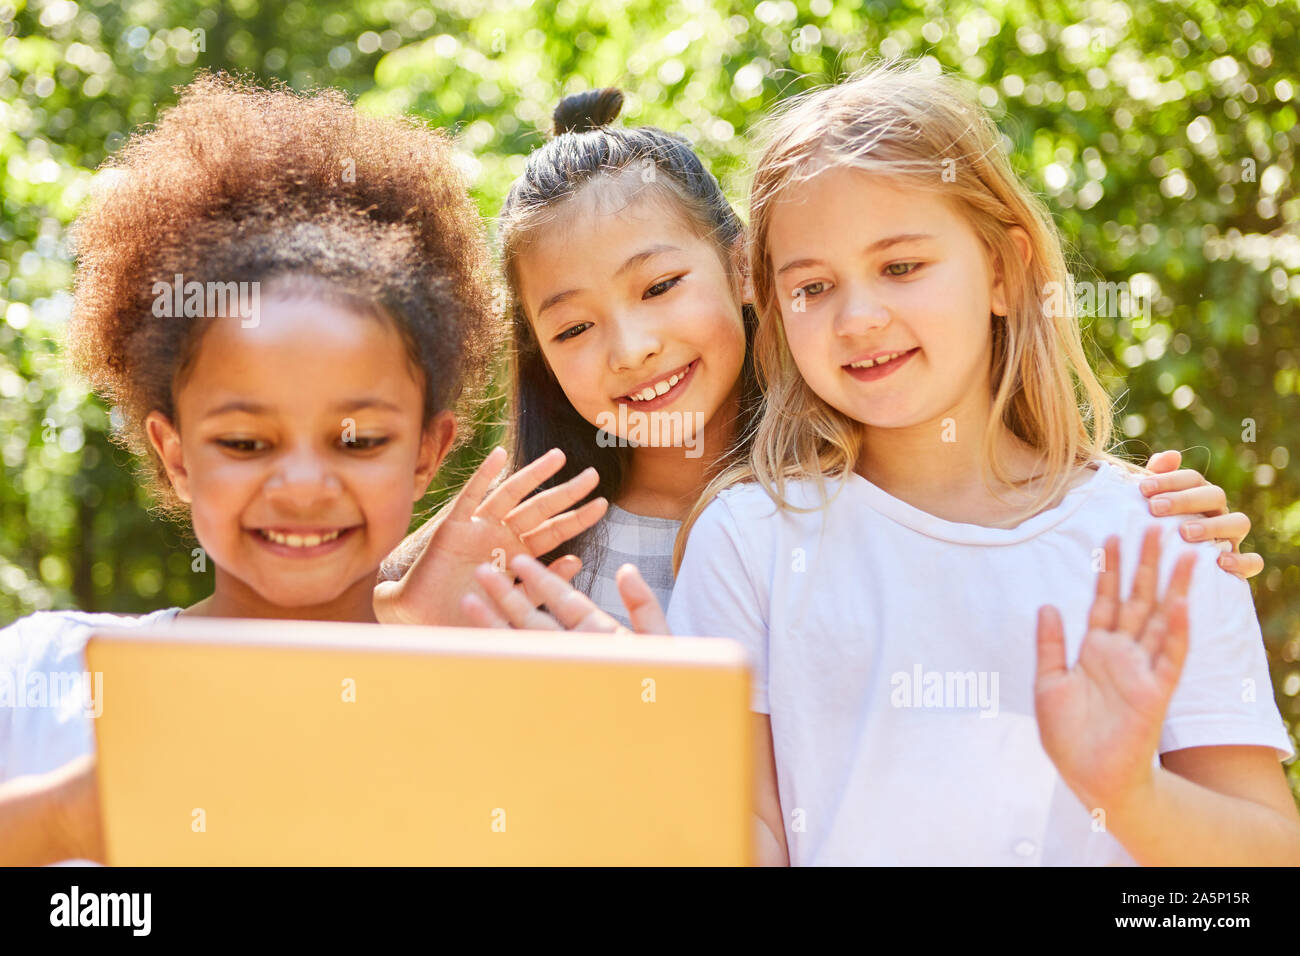 Girls waving together at video chat on tablet computer Stock Photo